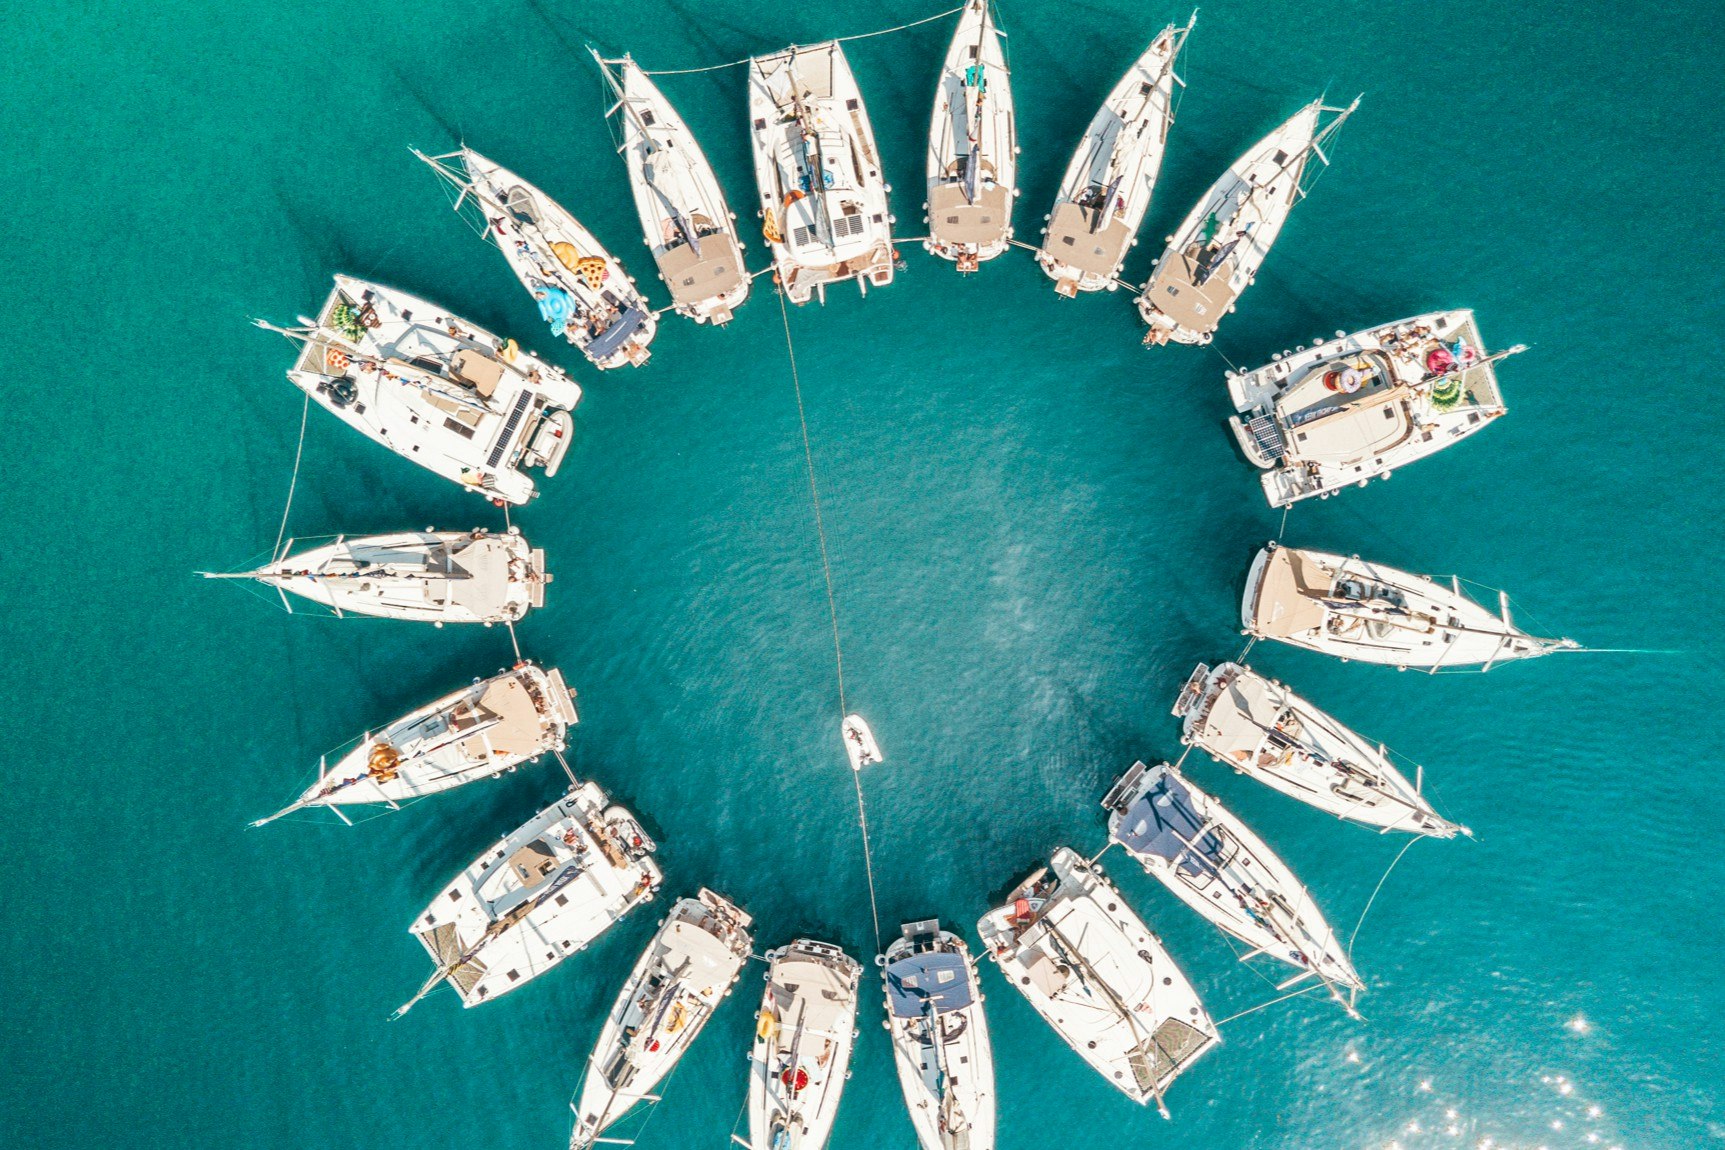 A series of yachts in the water arranged in a circular shape